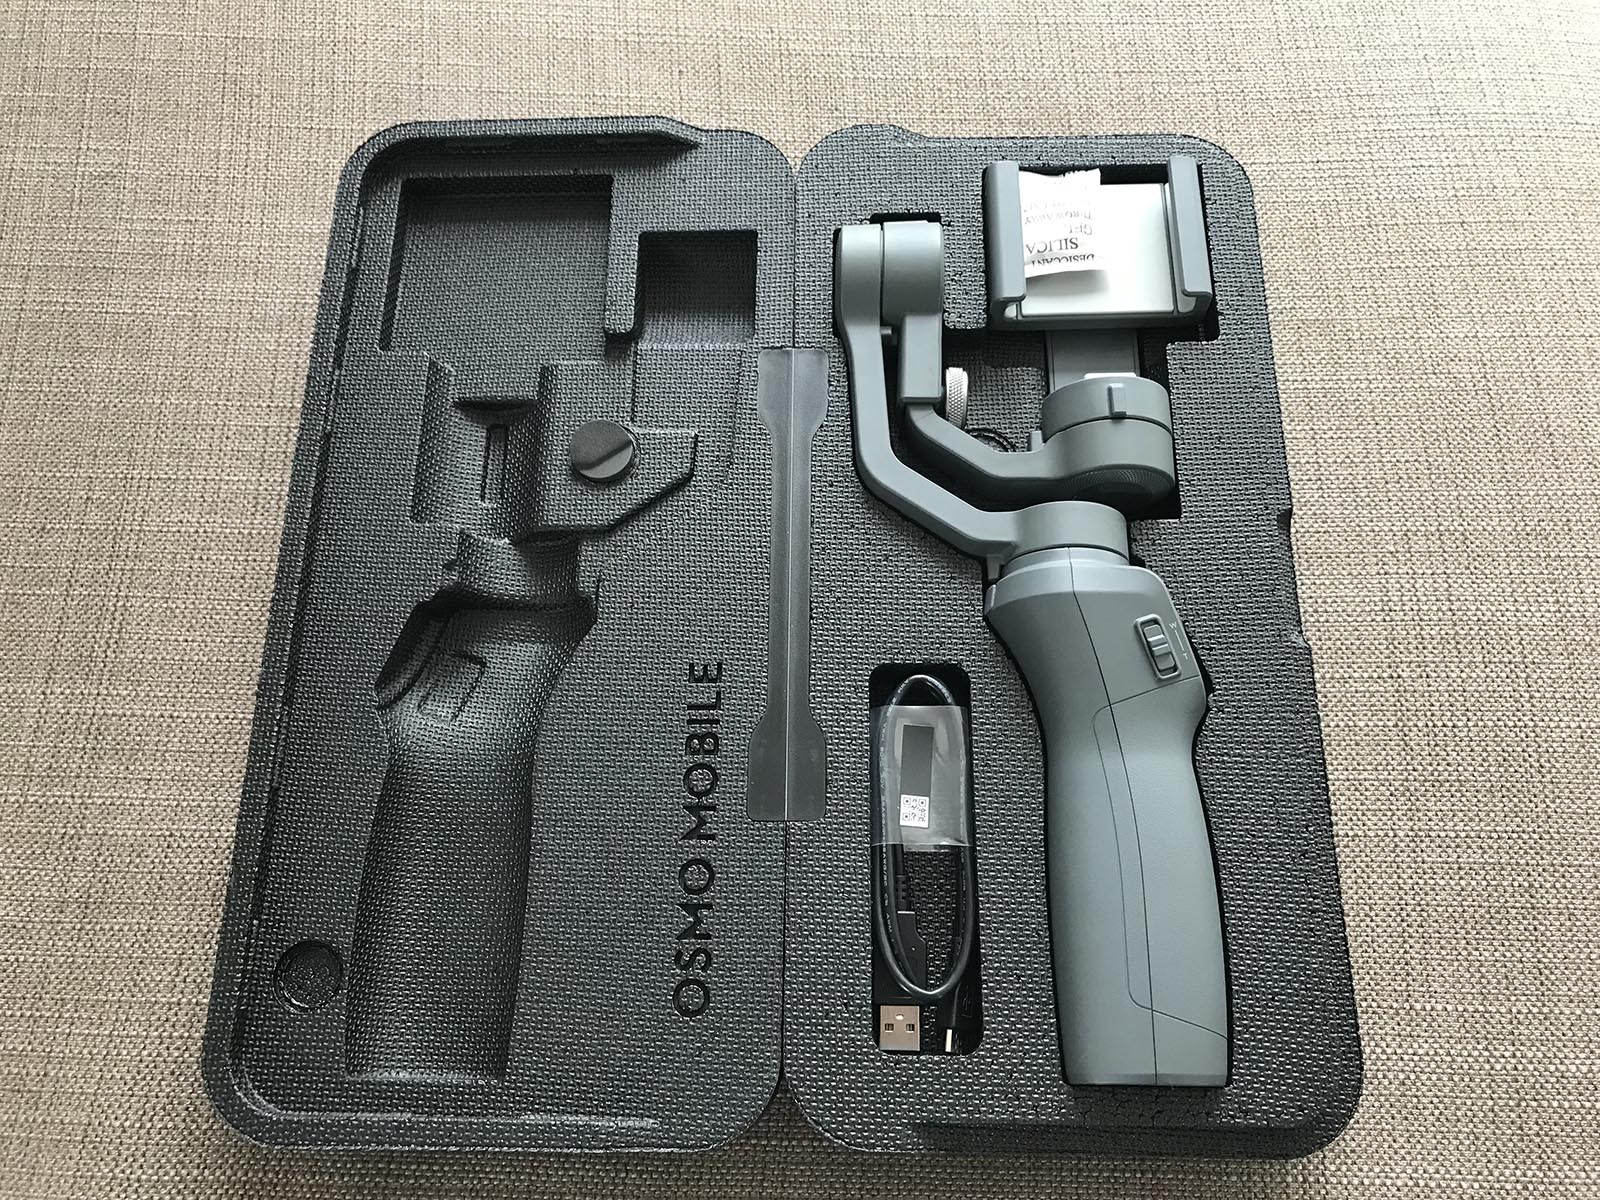 Test: DJI OSMO Mobile 2 Smartphone Gimbal in der Praxis - Drone 